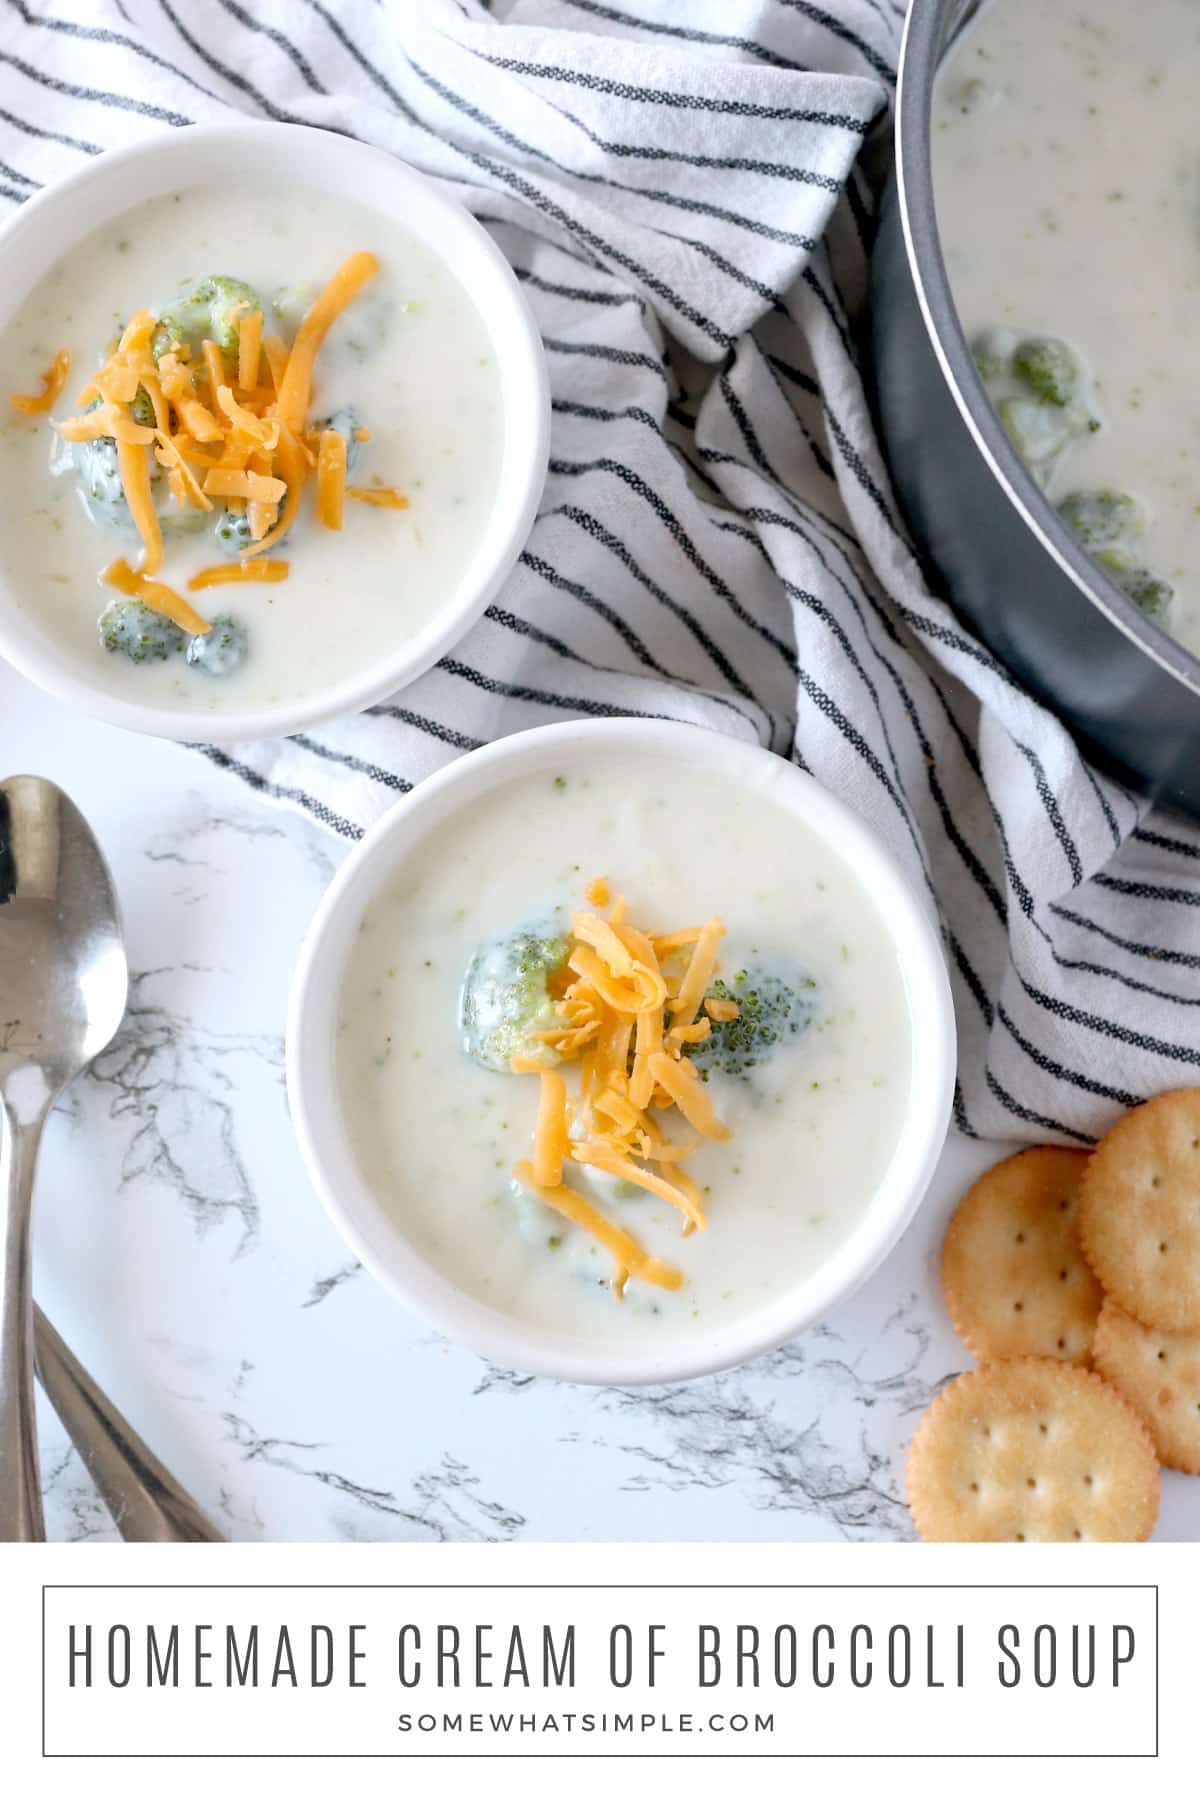 Made with broccoli, milk, butter, salt, and flour, this Cream of Broccoli Soup is creamy, delicious, and so easy to make! via @somewhatsimple